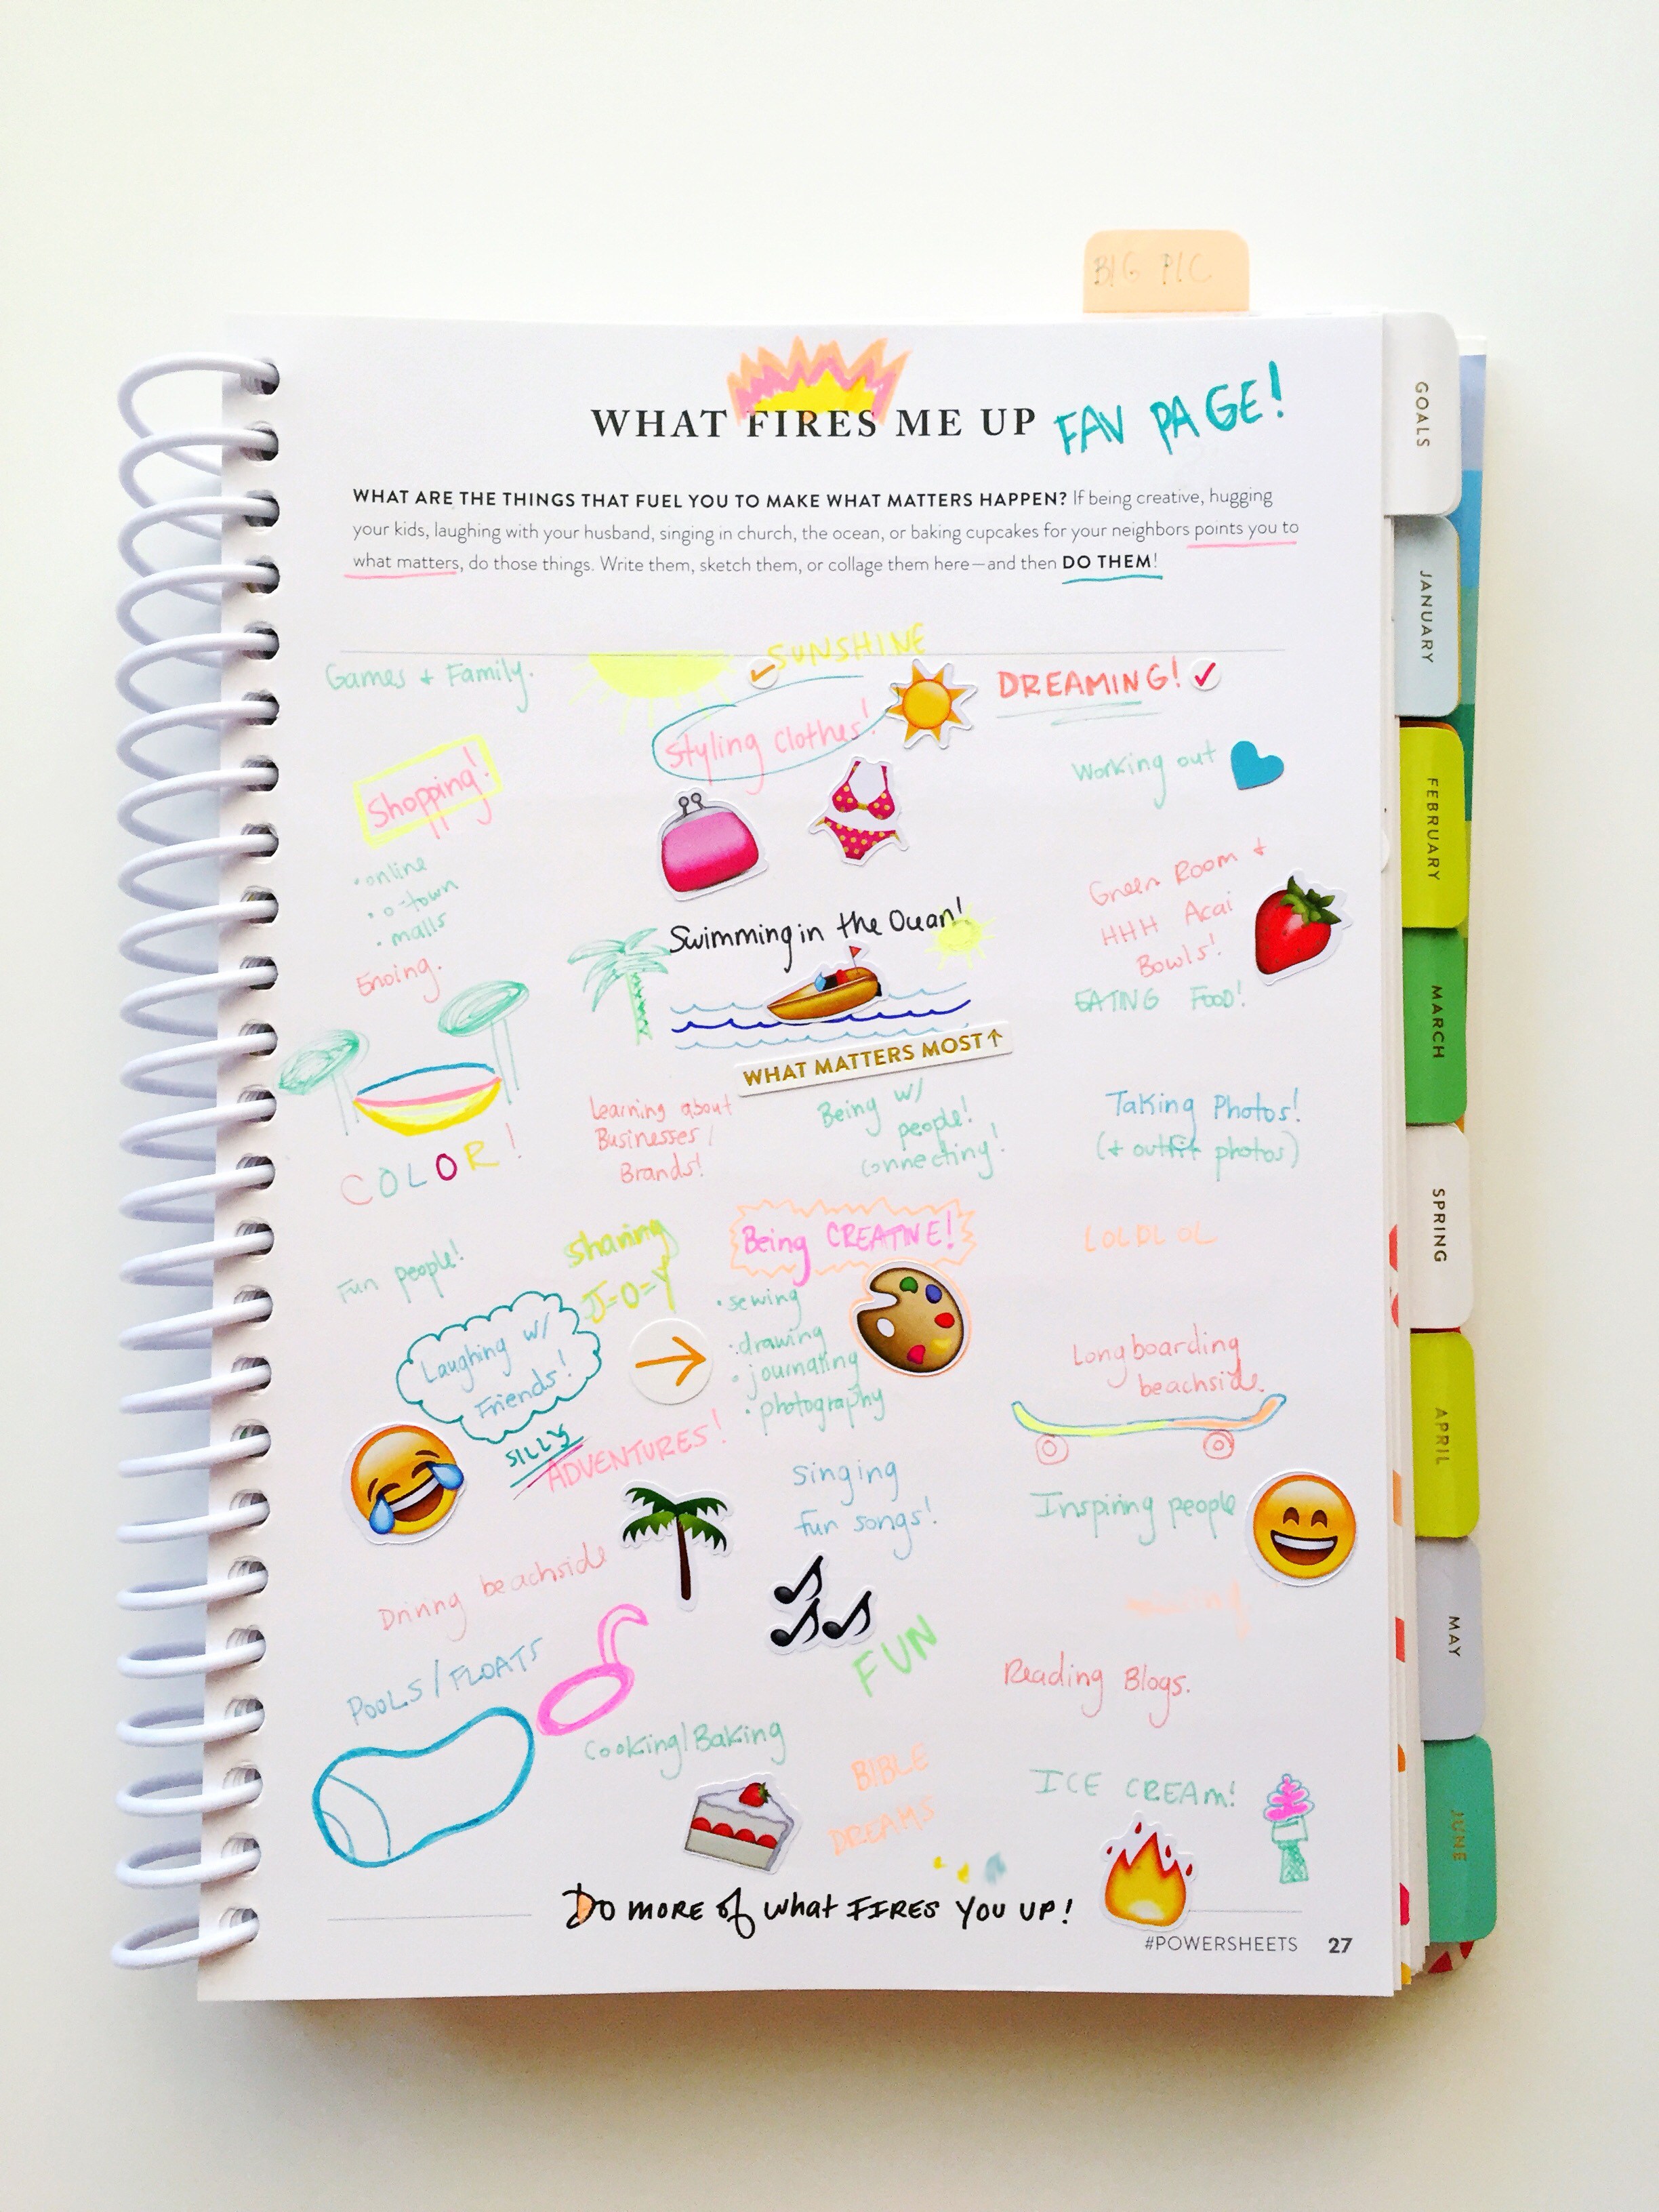 How to Plan Goals / How to Set Goals and Achieve Them / Goal Setting / Powersheets 2019 Intentional Goal Planner / Lara Casey Powersheets / See my 2019 Goals on Sunshine Style, www.sunshinestyleblog.com